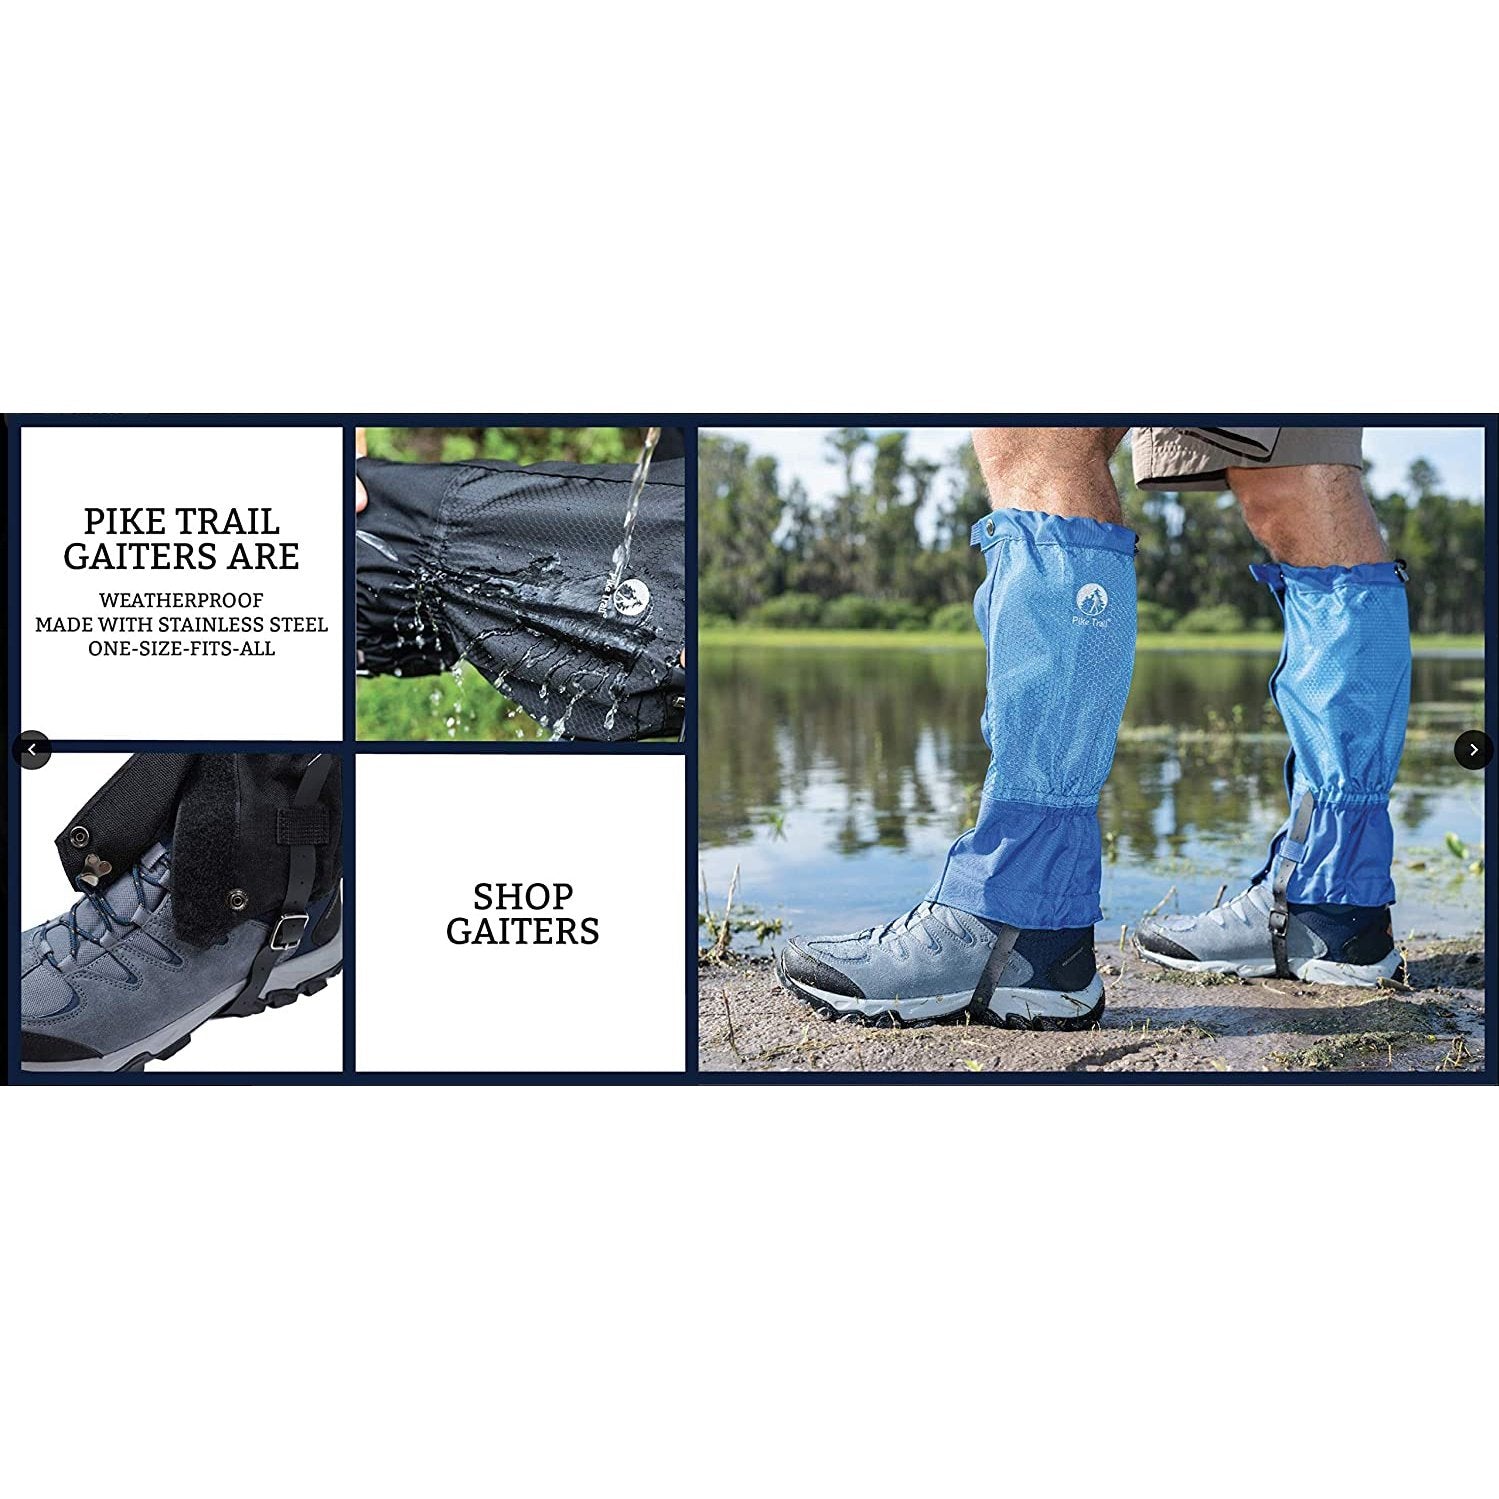 Pike Trail Leg and Ankle Gaiters for Men and Women - Waterproof